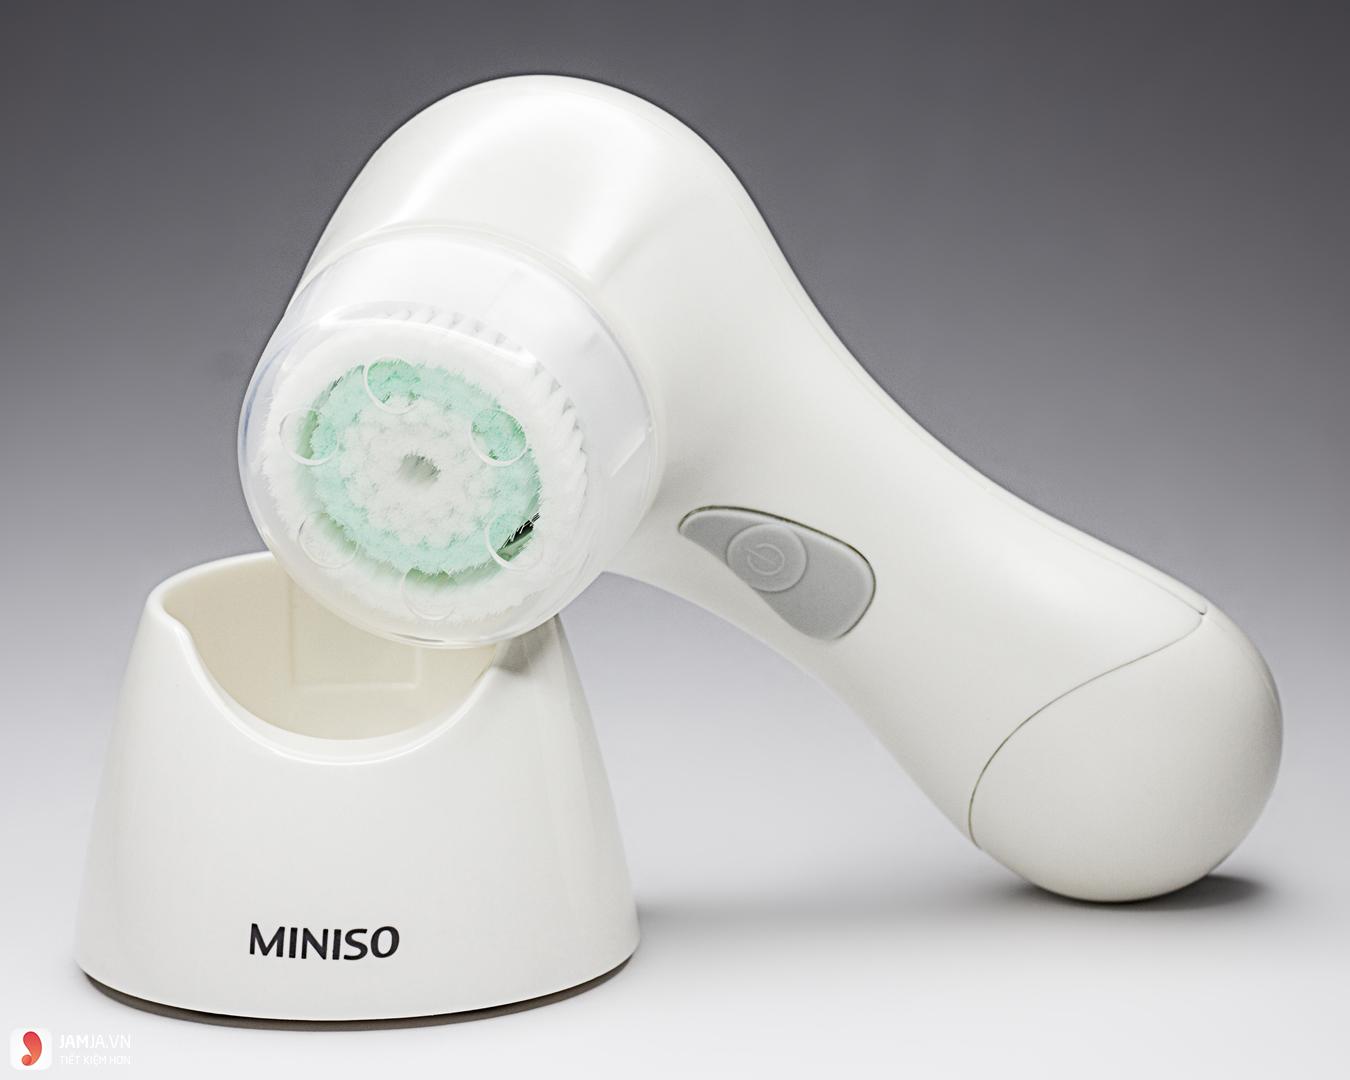 Miniso Sonic Facial Cleansing Brush